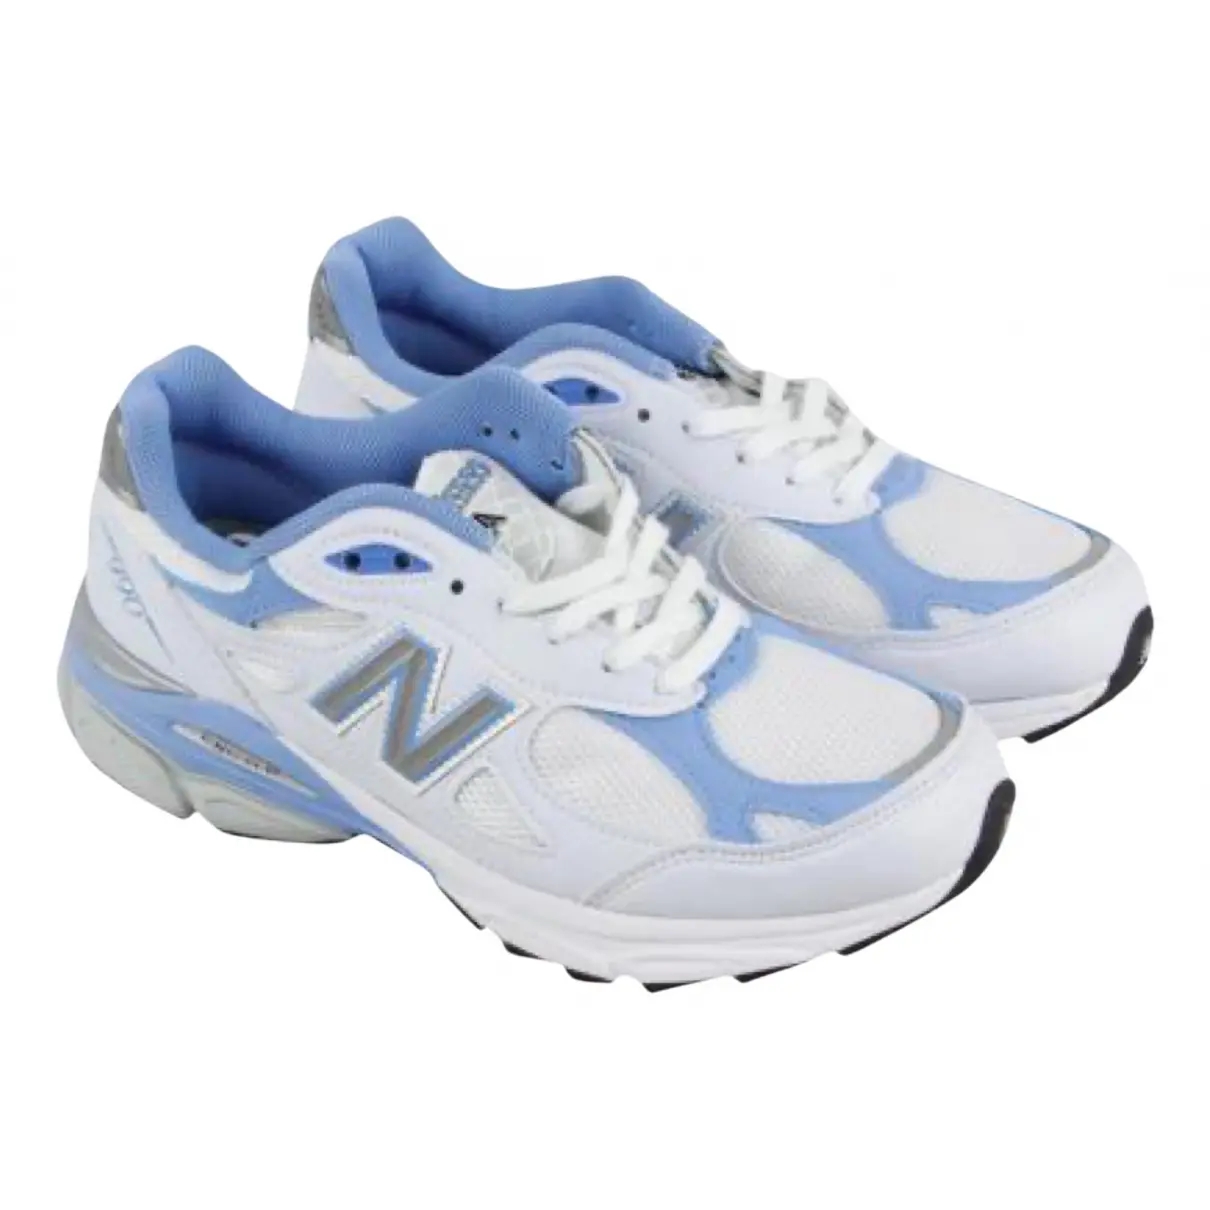 990 leather trainers New Balance